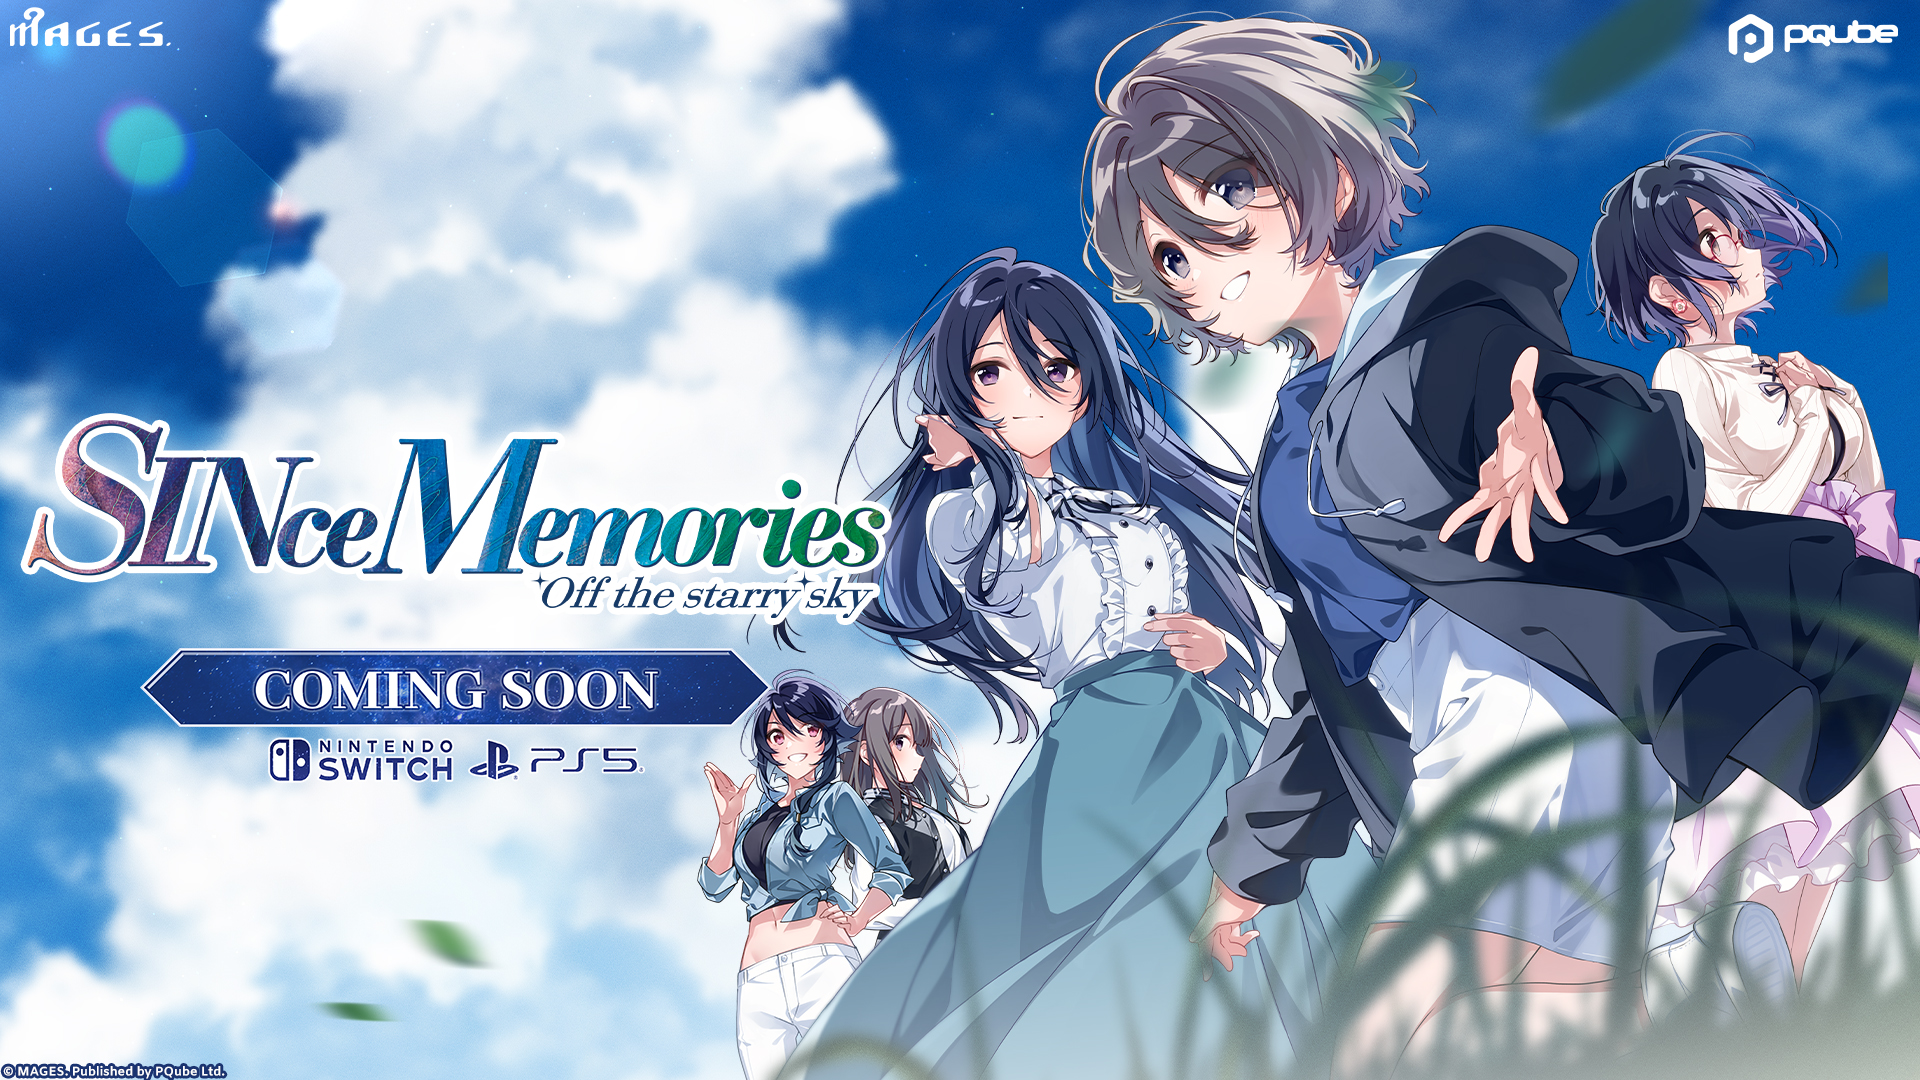 A poignant visual novel, 'SINce Memories: Off the Starry Sky' is 